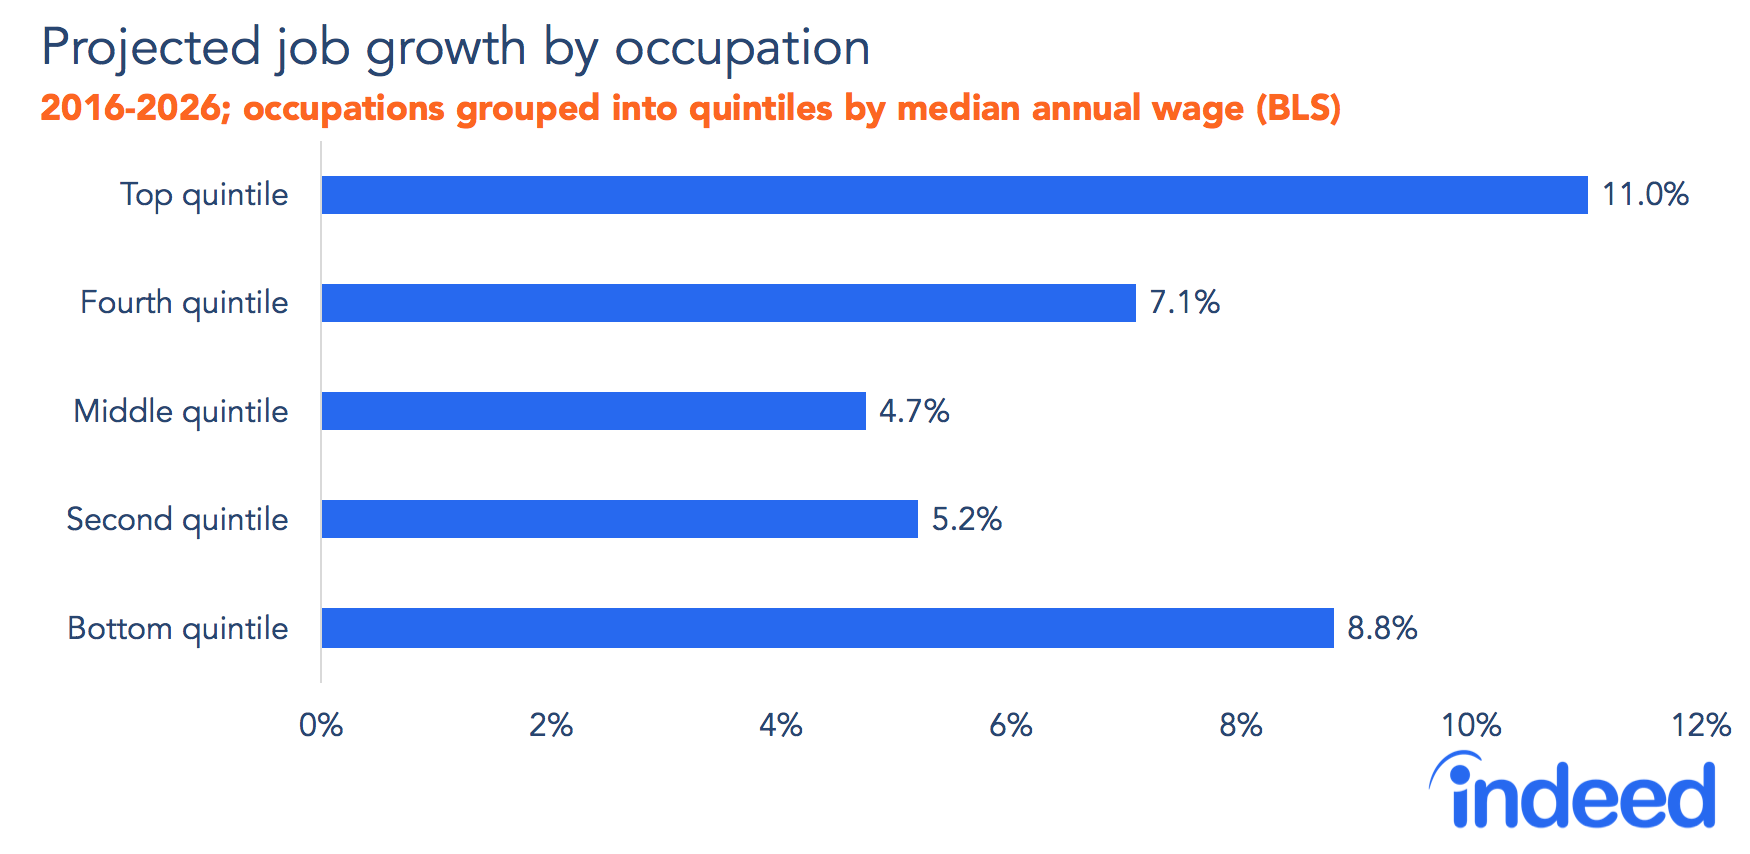 Projected job growth by occupation